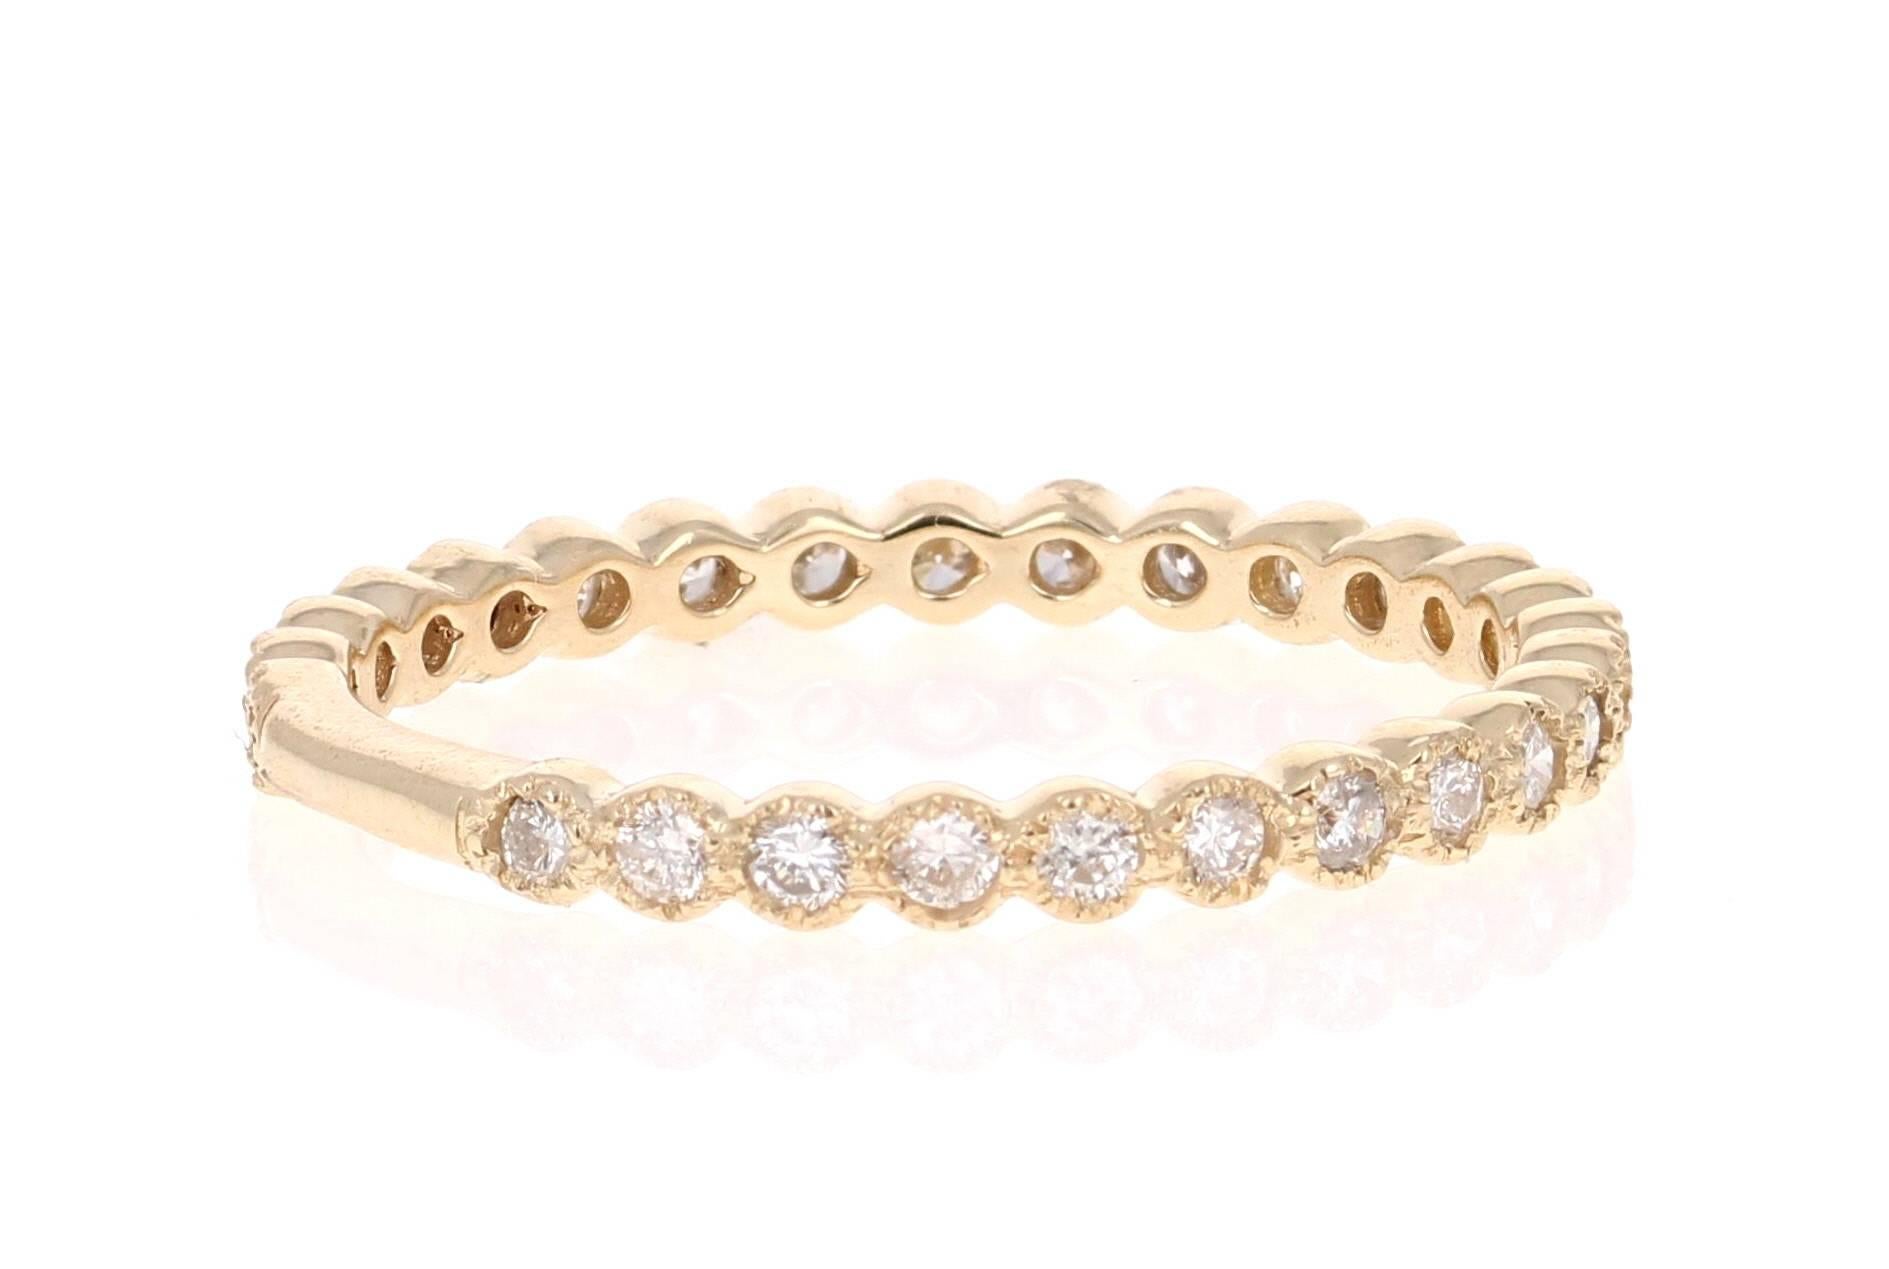 Cute and dainty 0.40 Carat Diamond band that is sure to be a great addition to anyone's accessory collection. There are 27 Round Cut Diamonds that weigh 0.40 carats. The total carat weight of the band is 0.40 carats. The band is made in 14K Yellow